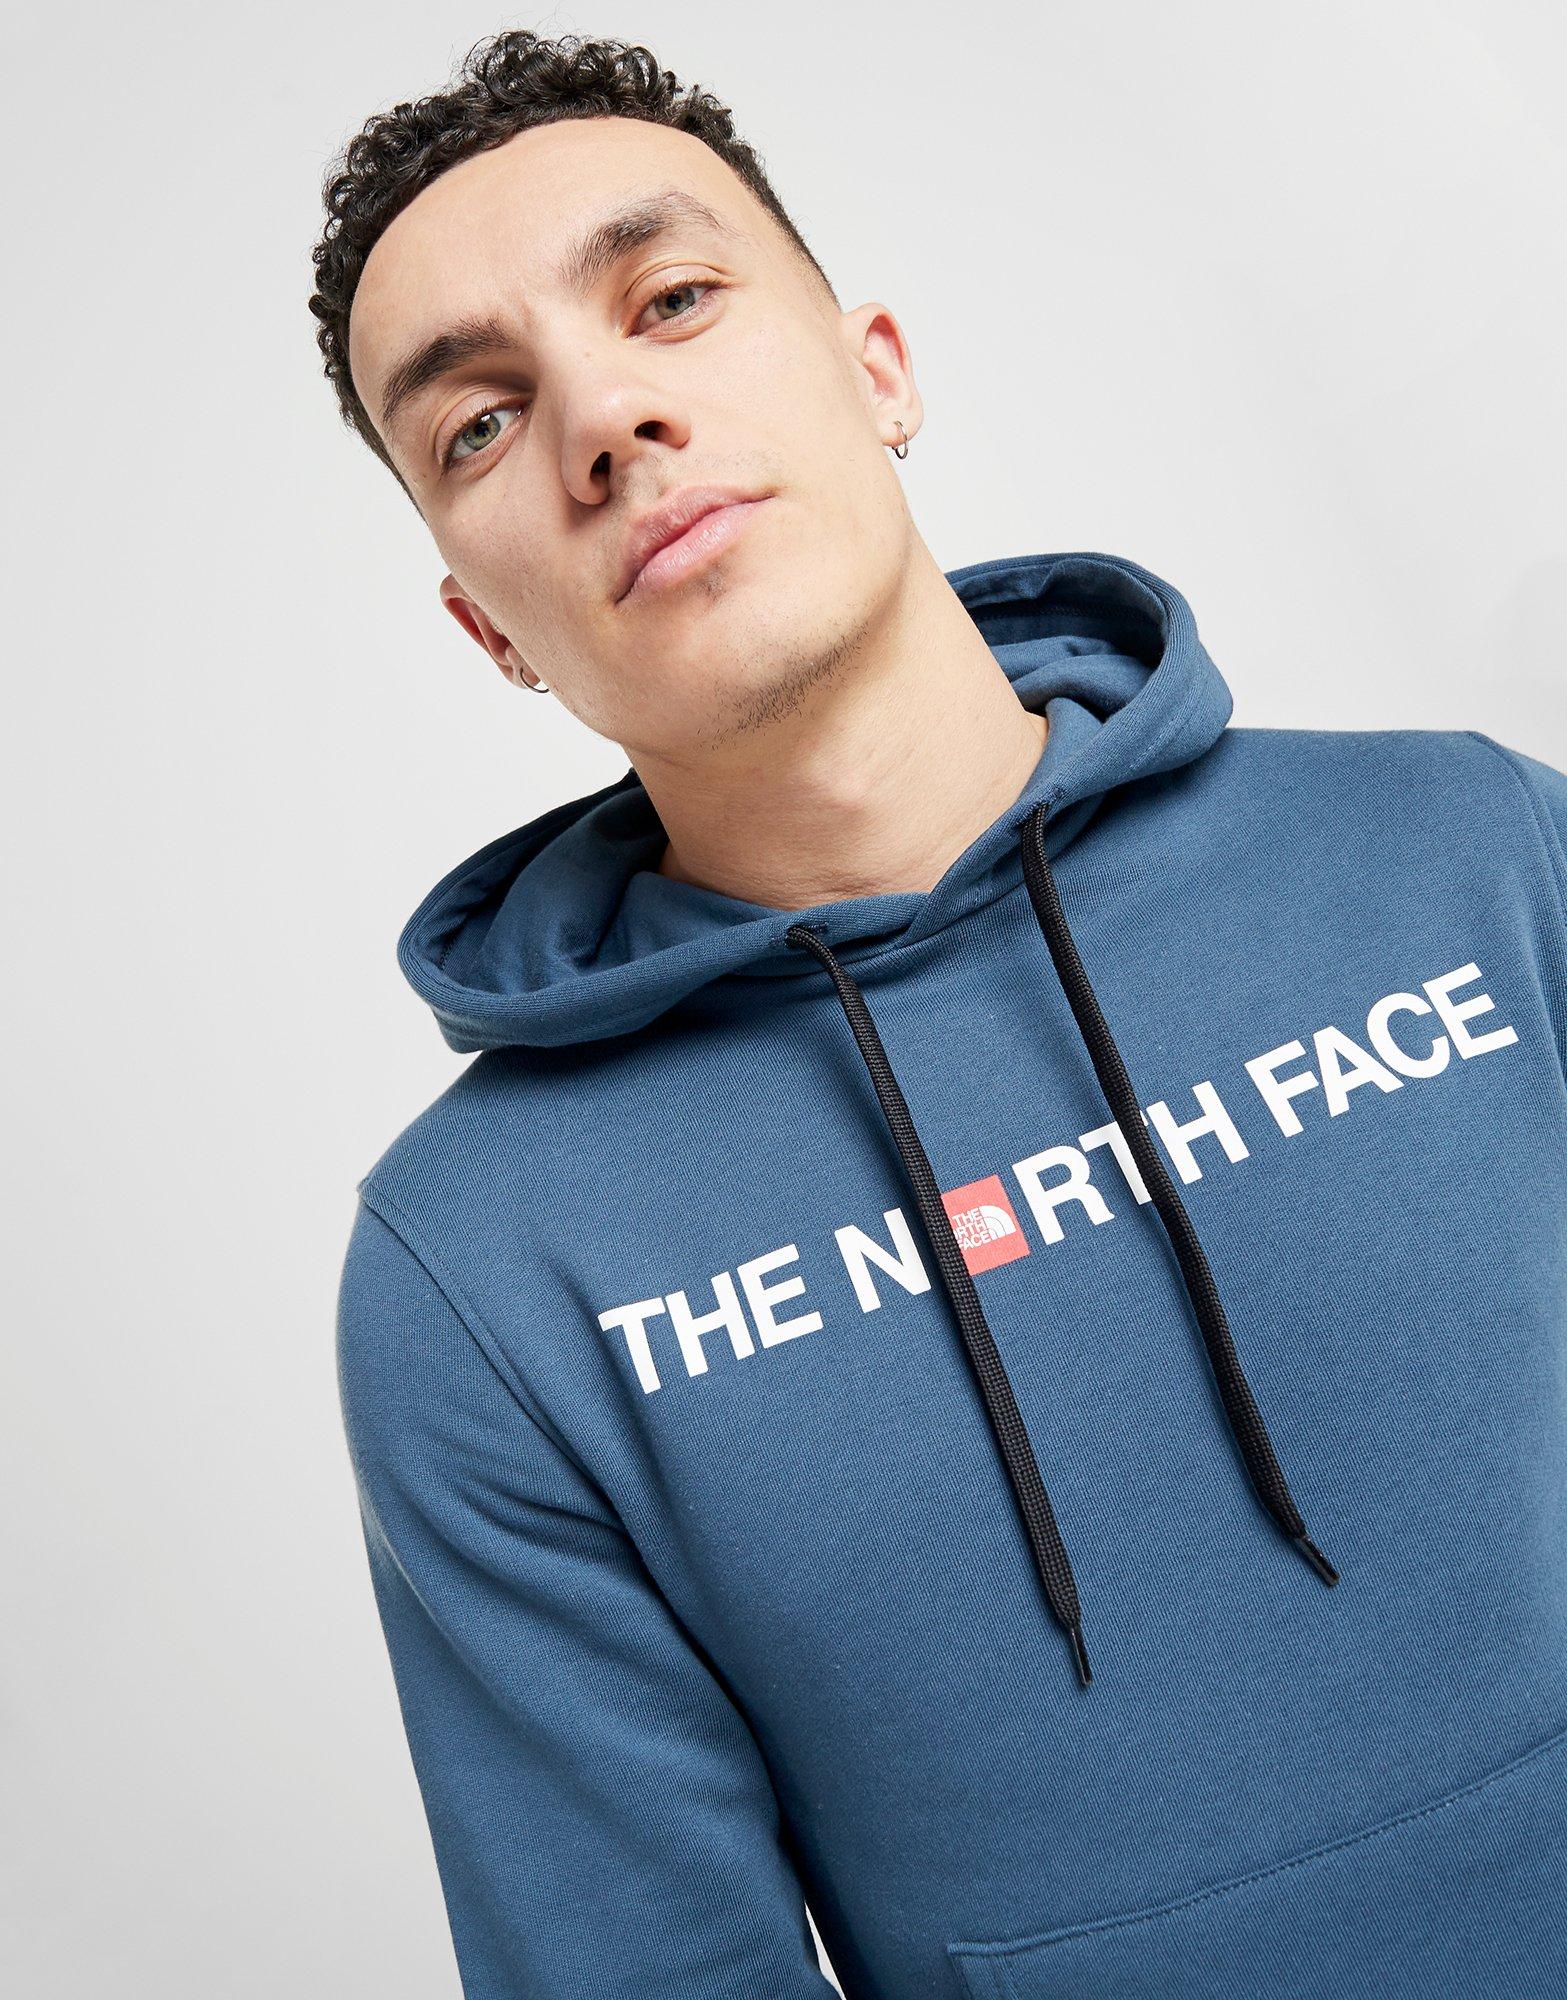 jd sports north face hoodie